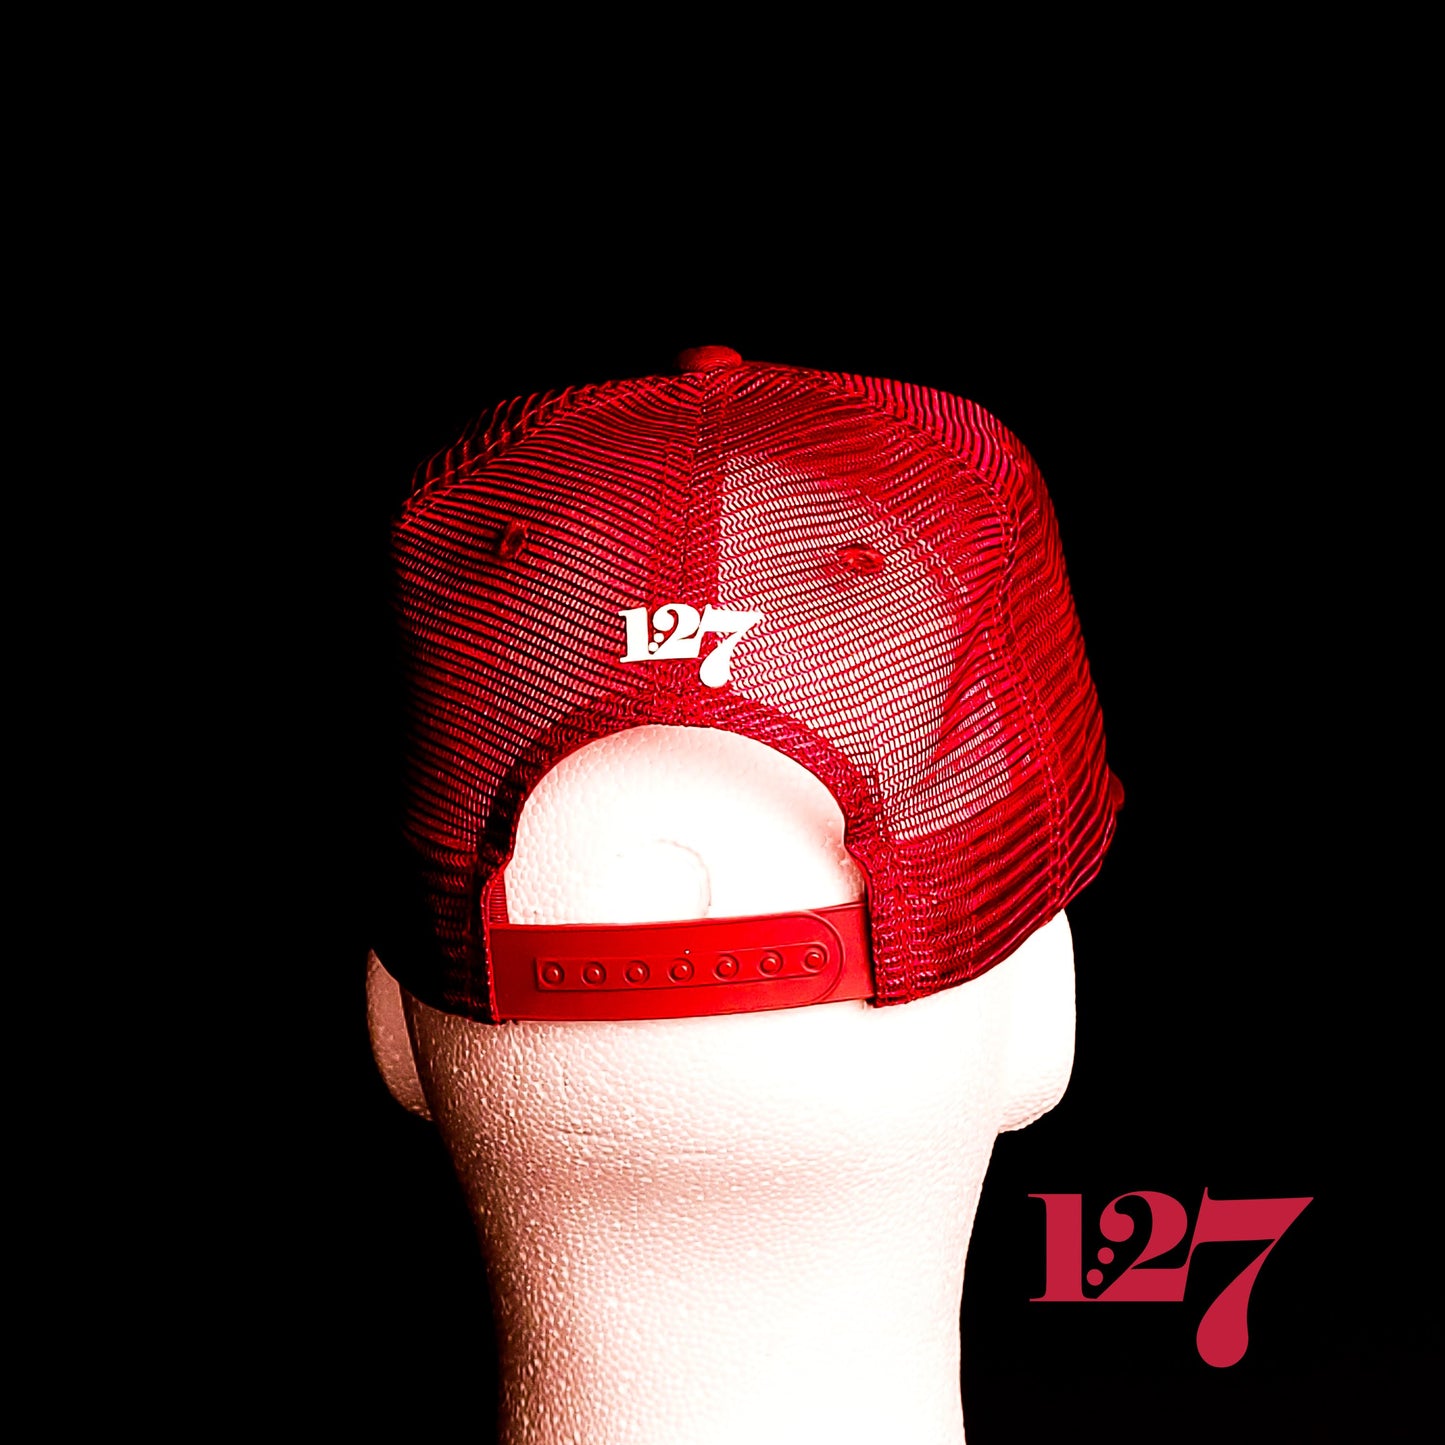 1:27 Hat, Maroon Trucker Hat, Christian Hats, Leather Patch